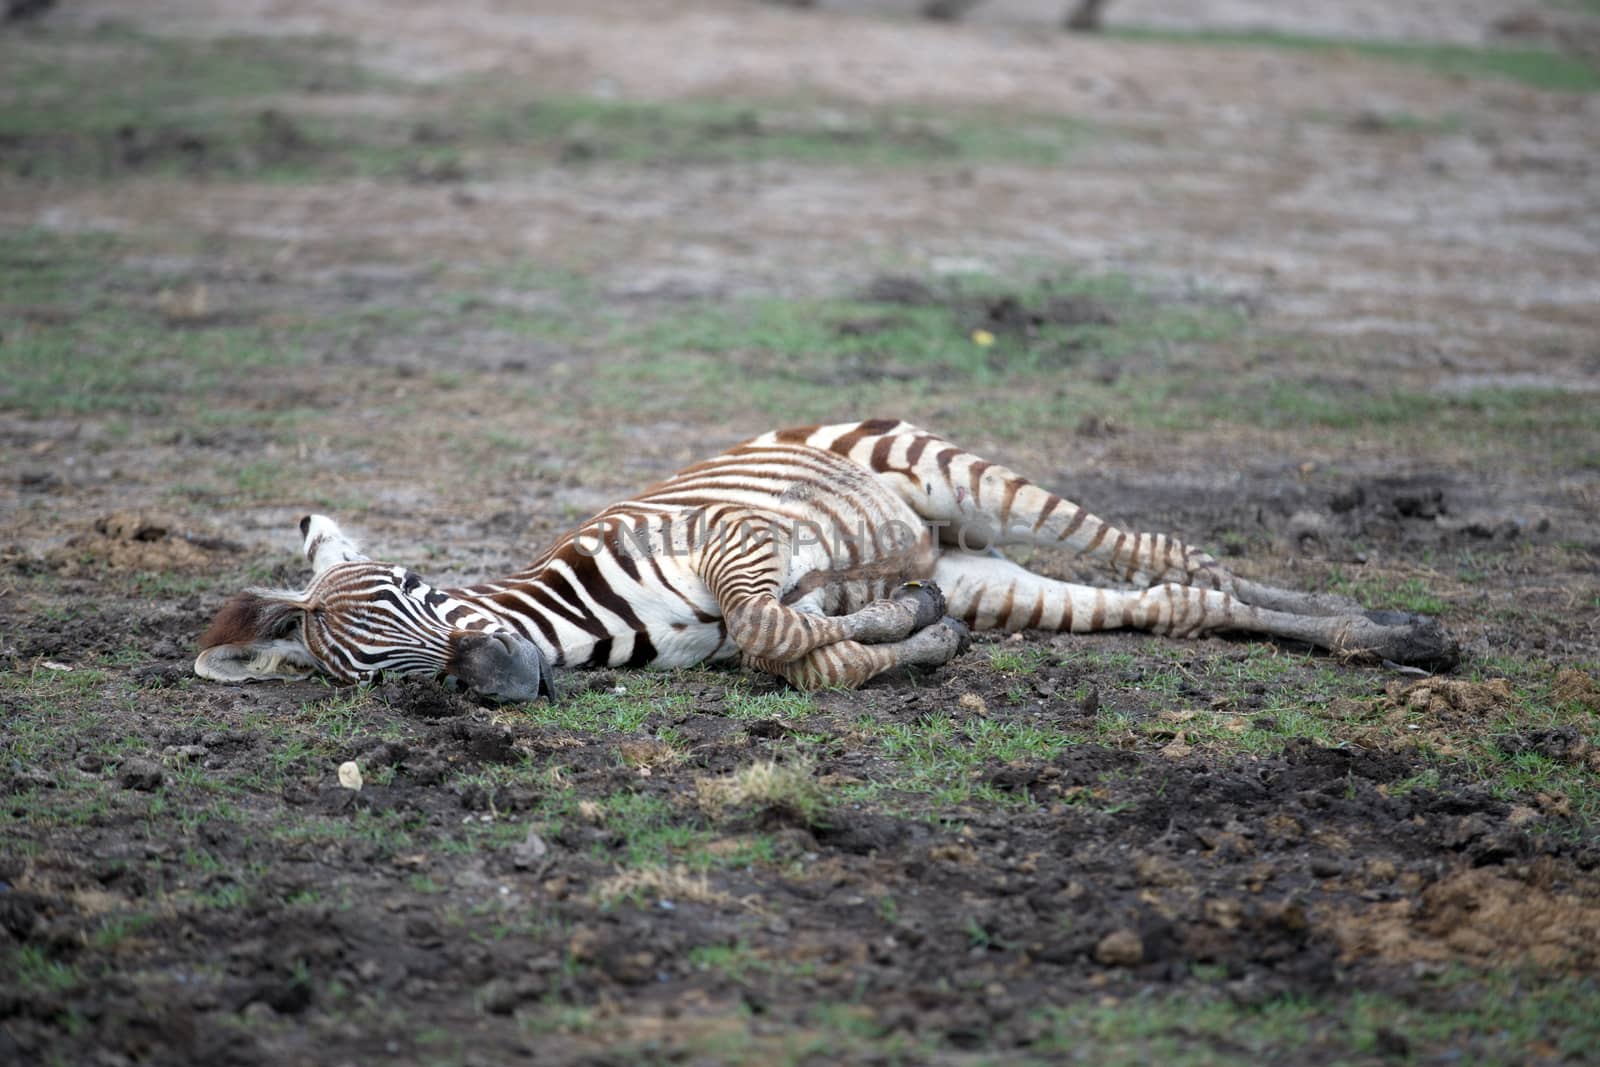 A baby zebra is lying on the ground during the day, soft focus.